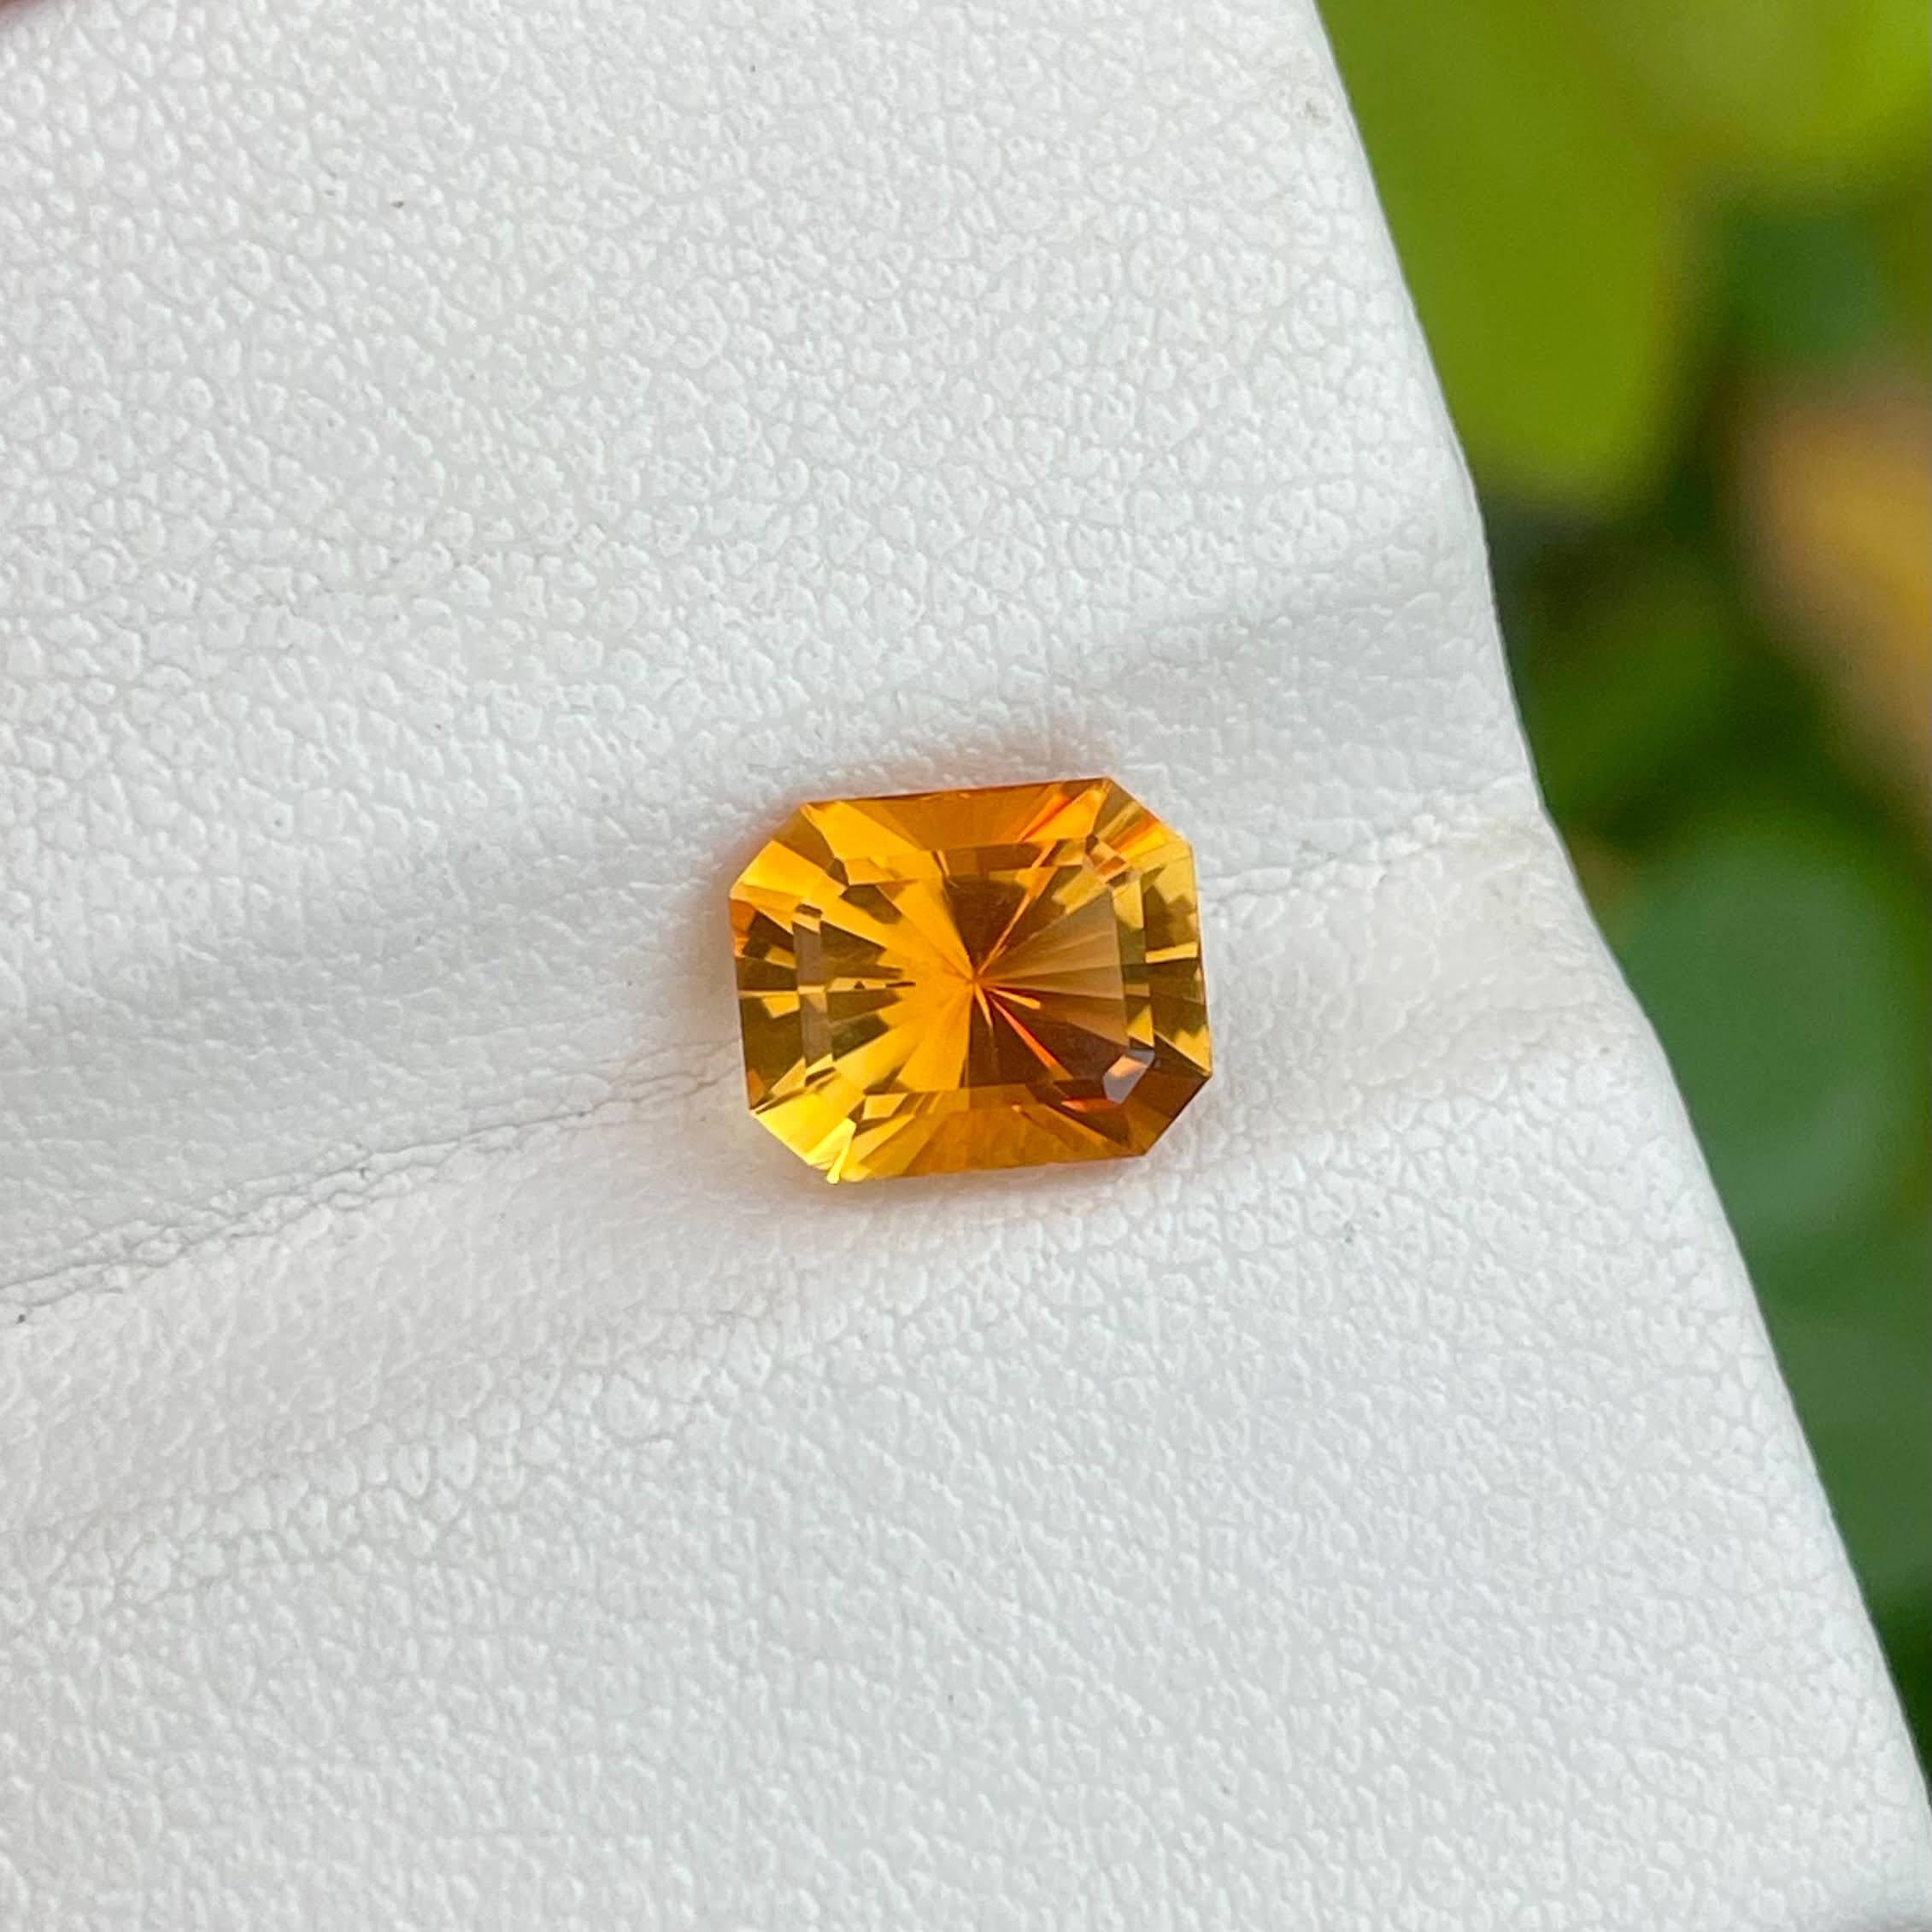 Weight 1.70 carats 
Dimensions 7.9x6.5x5.3 mm
Treatment none 
Origin Portugal 
Clarity loupe clean 
Shape octagon 
Cut custom precision 



Crafted with meticulous precision, this 1.70 carats Madeira Citrine Stone embodies the epitome of elegance